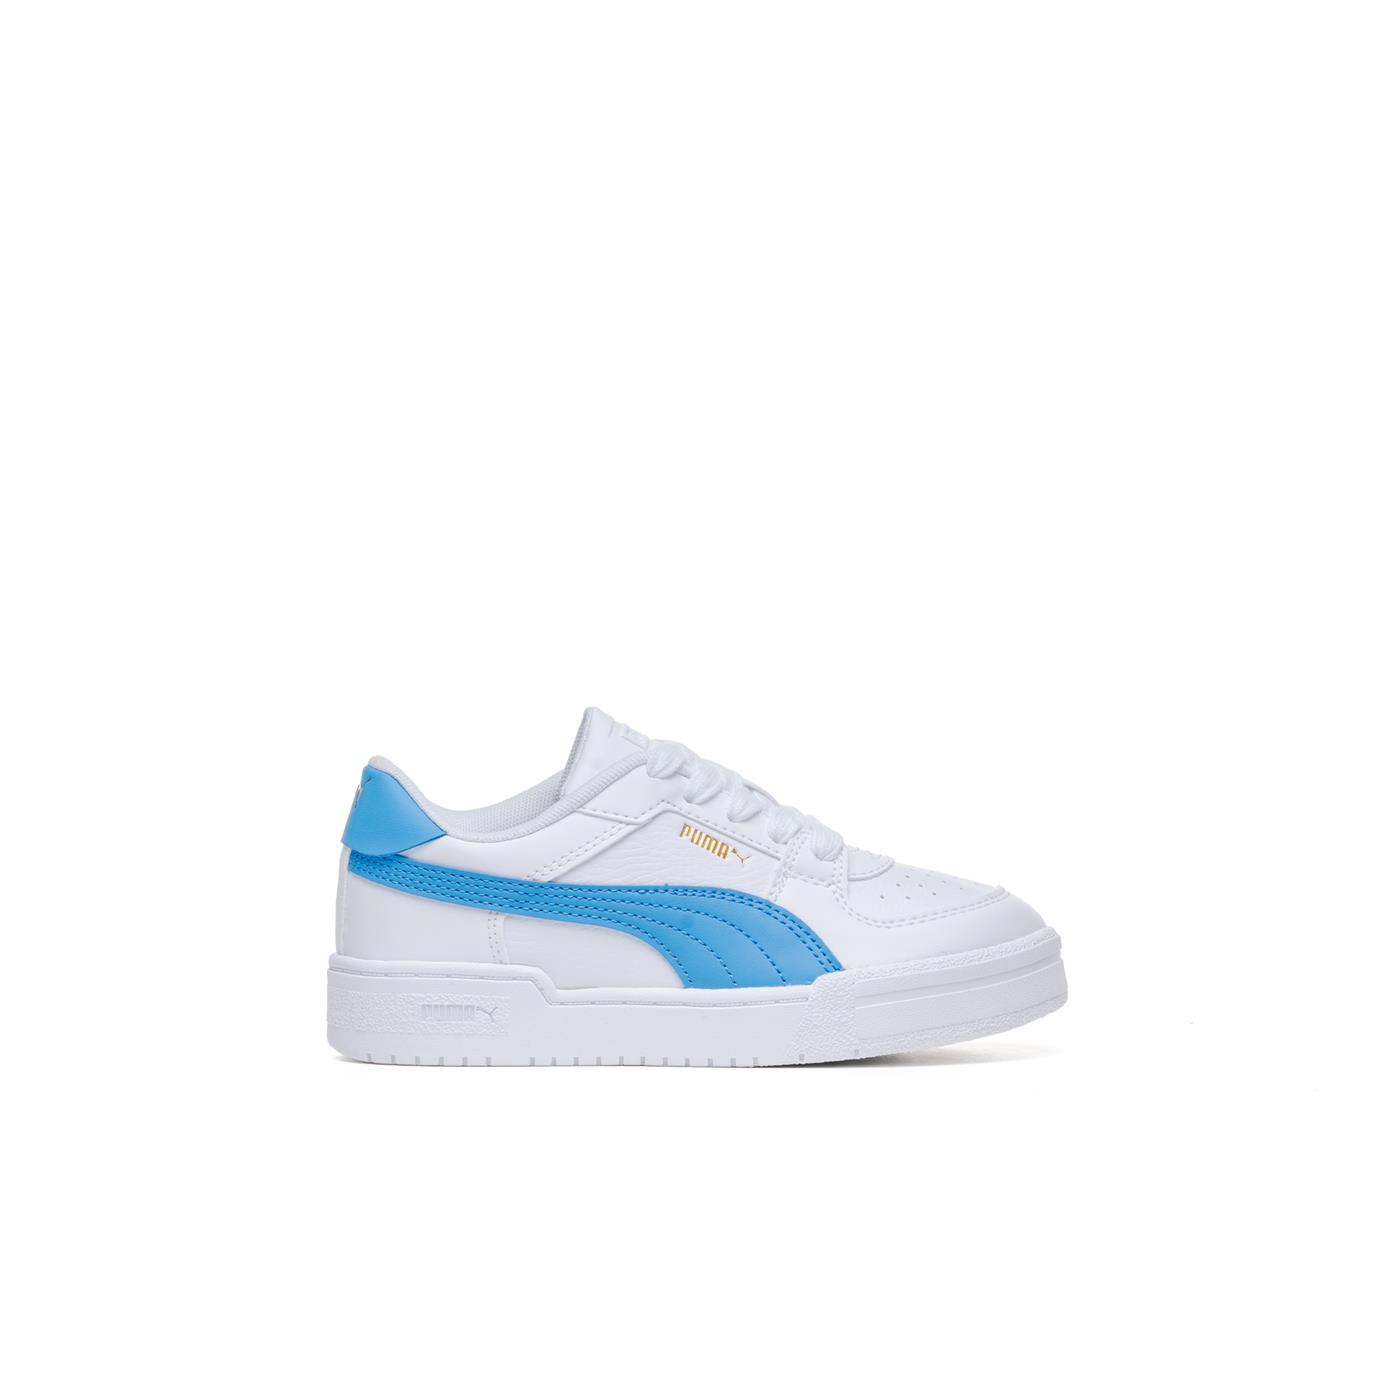 RvceShops | Child PS mujer 16 Puma - sneakers | Sneakers PUMA Classic Pro | CA amarillas 382278 White for